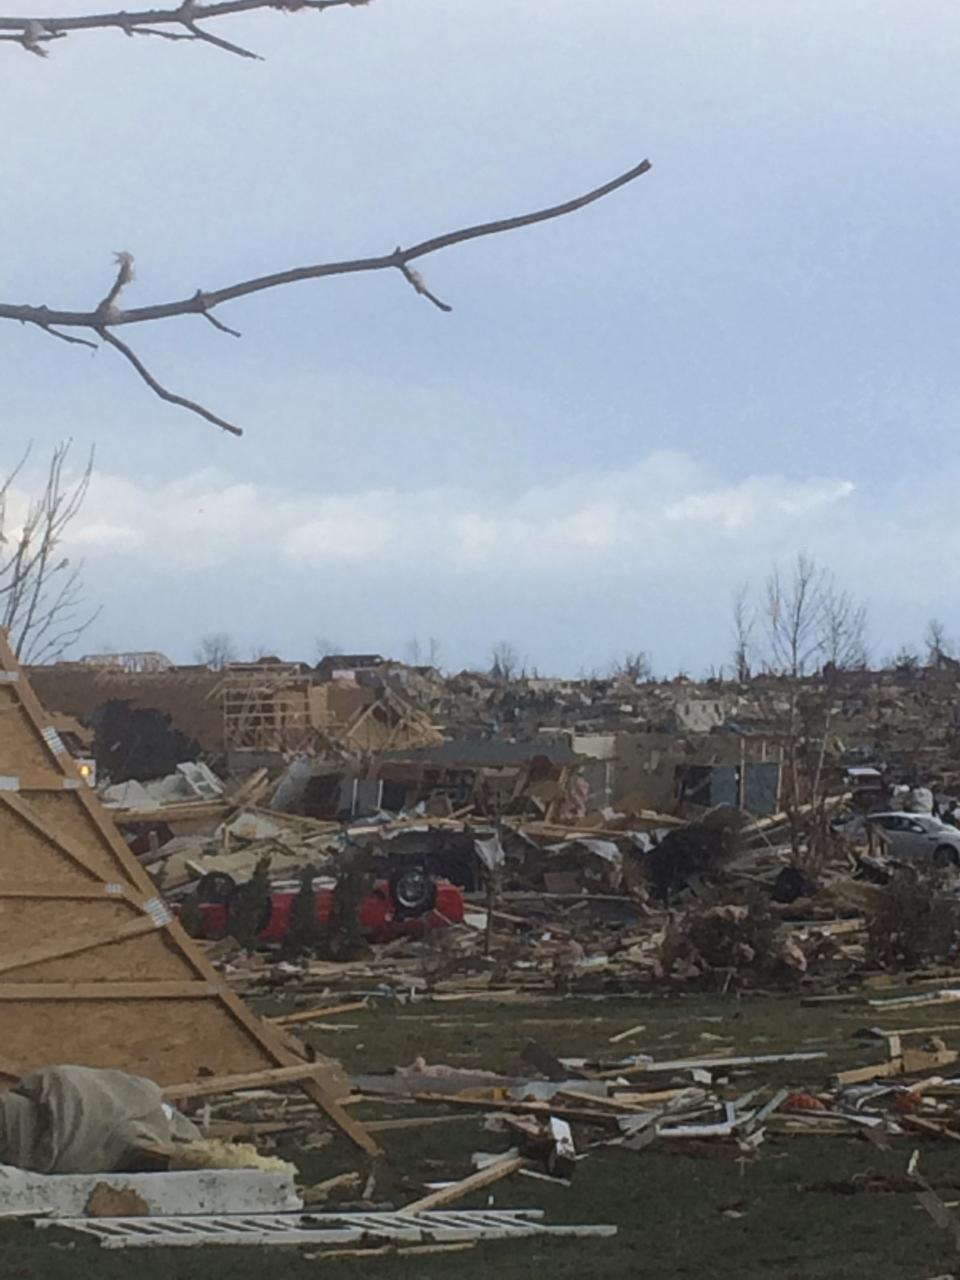 Extensive damage to homes and vehicles is pictured in the aftermath of a tornado that touched down in Washington, Illinois November 17, 2013, in this photo courtesy of Anthony Khoury. A fast-moving storm system spawned multiple tornadoes in Illinois and Indiana, threatening some 53 million people across 10 Midwestern states on Sunday, U.S. weather officials said. Washington, Illinois is located 145 miles (233 km) southwest of Chicago. REUTERS/Anthony Khoury/Handout via Reuters (UNITED STATES - Tags: DISASTER ENVIRONMENT) ATTENTION EDITORS - THIS IMAGE HAS BEEN SUPPLIED BY A THIRD PARTY. IT IS DISTRIBUTED, EXACTLY AS RECEIVED BY REUTERS, AS A SERVICE TO CLIENTS. NO SALES. NO ARCHIVES. FOR EDITORIAL USE ONLY. NOT FOR SALE FOR MARKETING OR ADVERTISING CAMPAIGNS. MANDATORY CREDIT